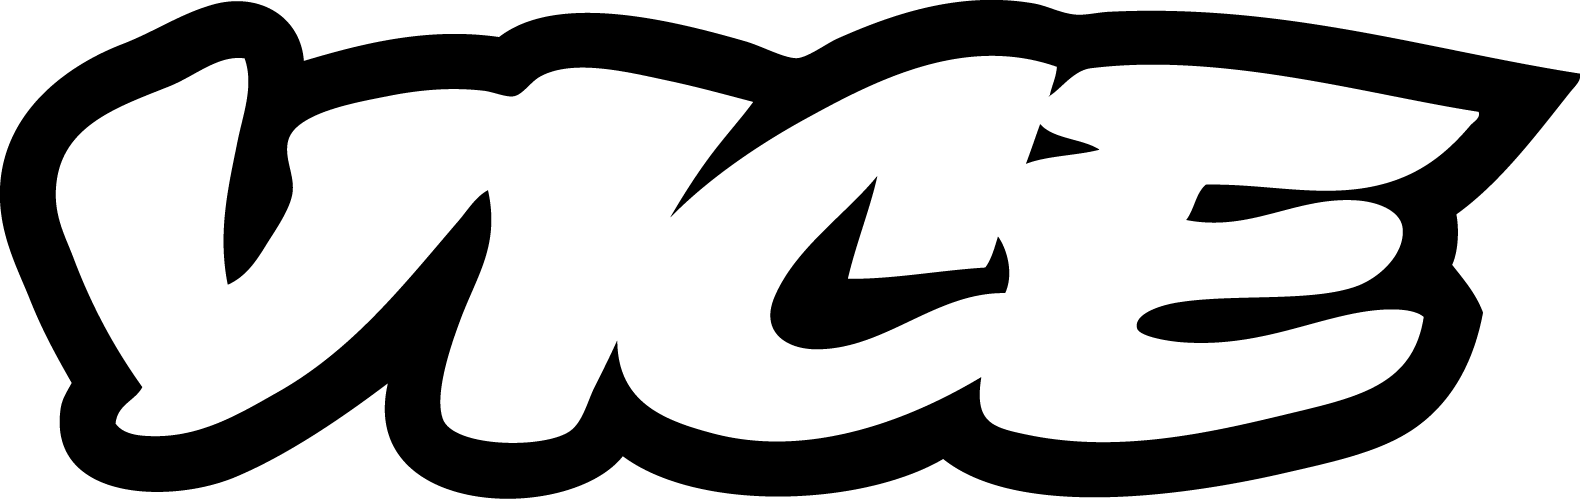 Vice2.png